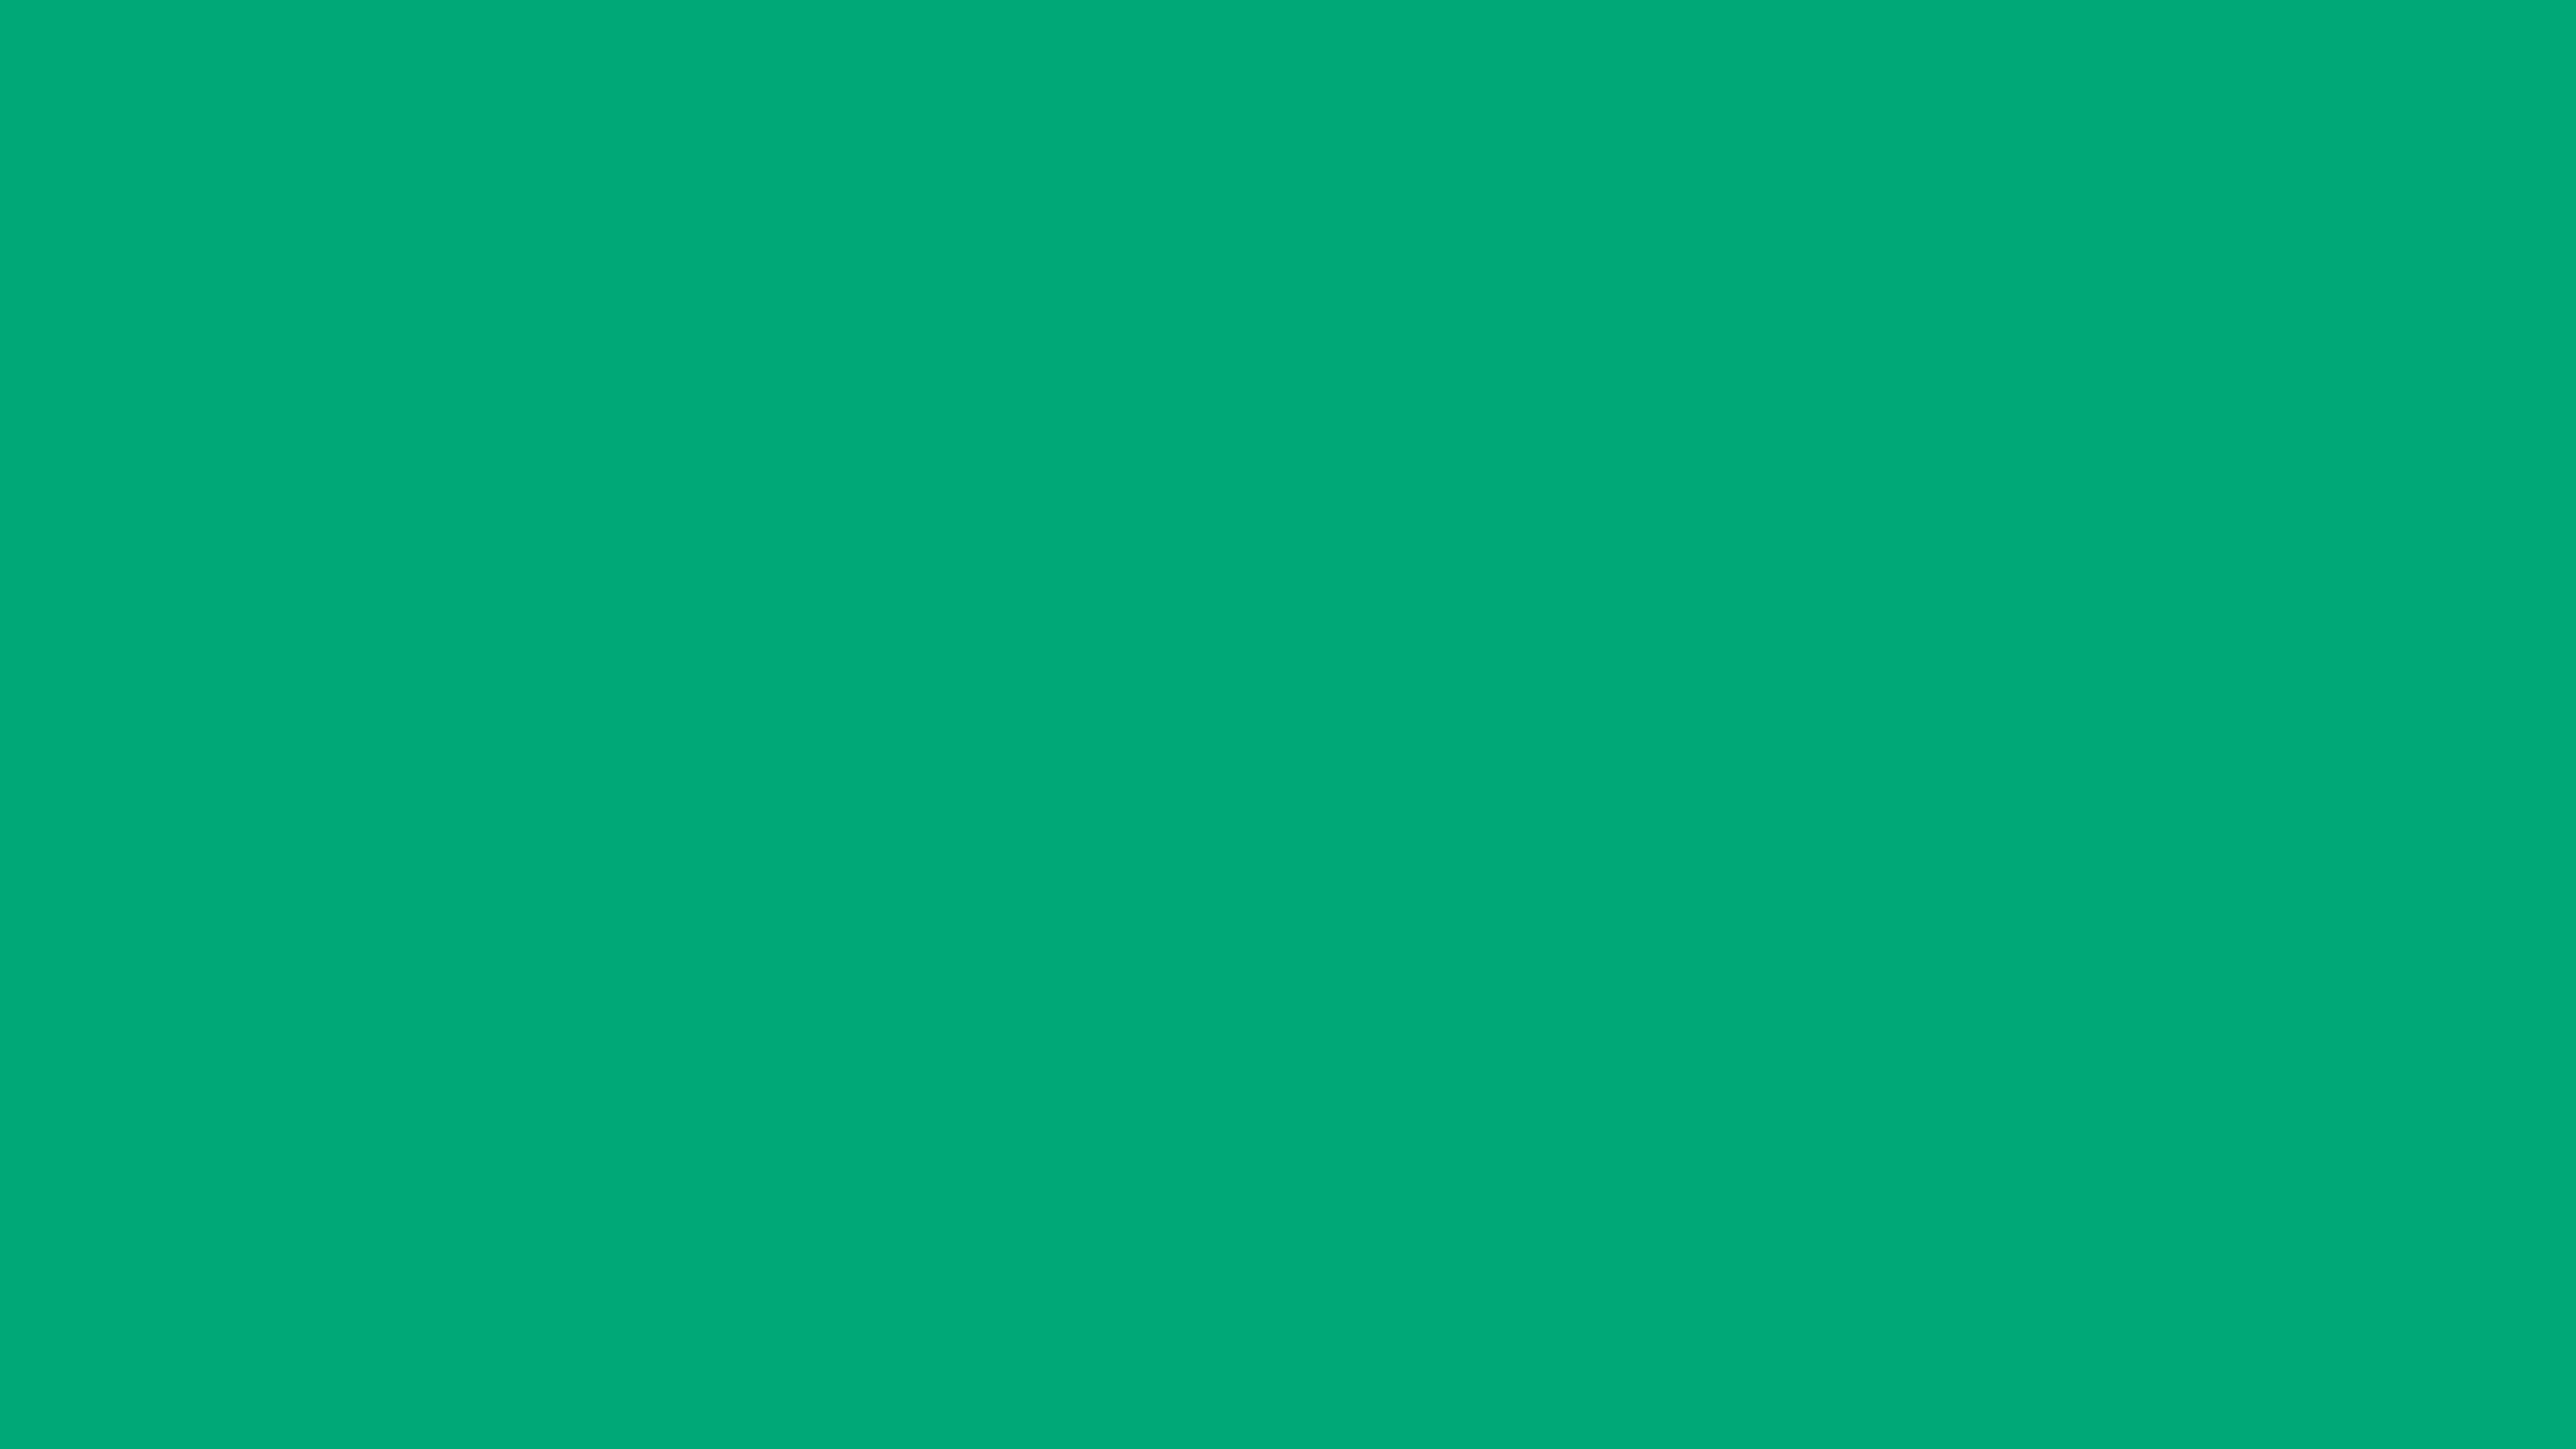 7680x4320 Green Munsell Solid Color Background